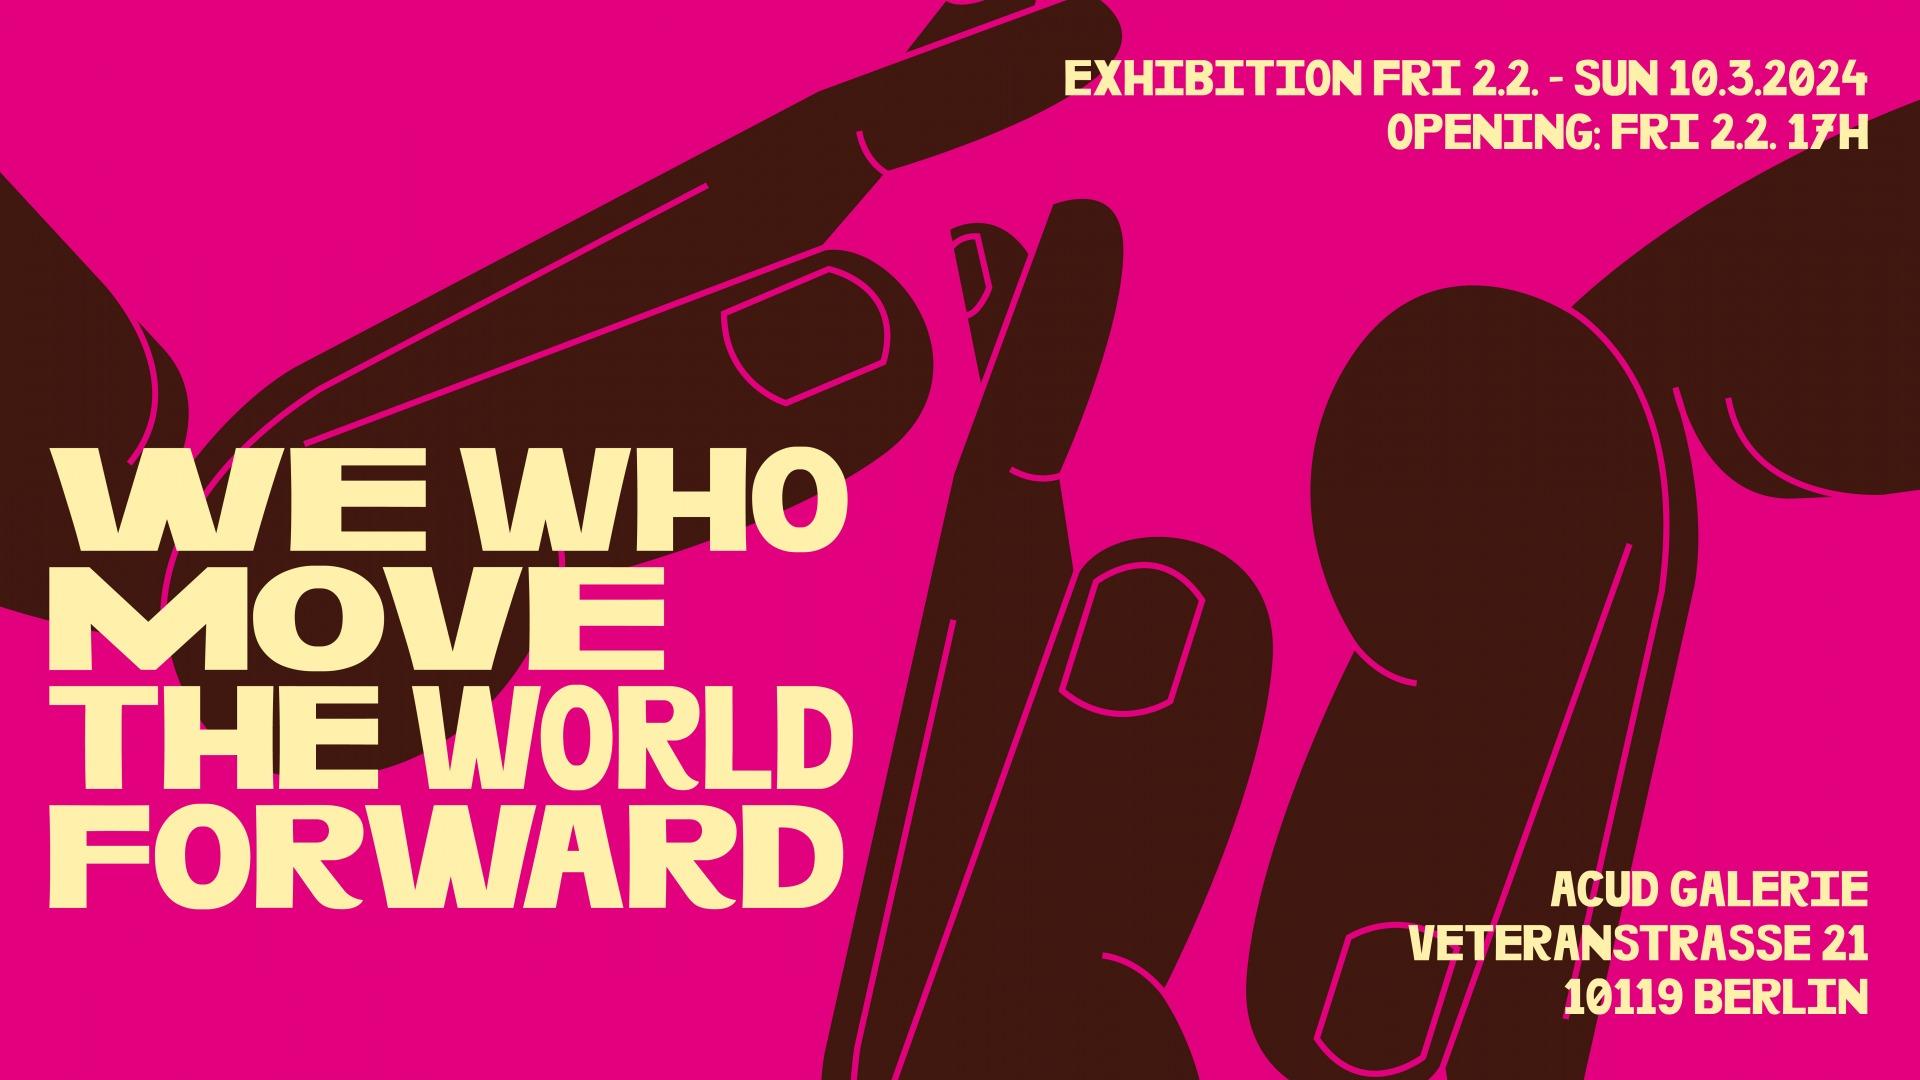 We Who Move The World Forward  | Group Exhibition | Acud Galerie